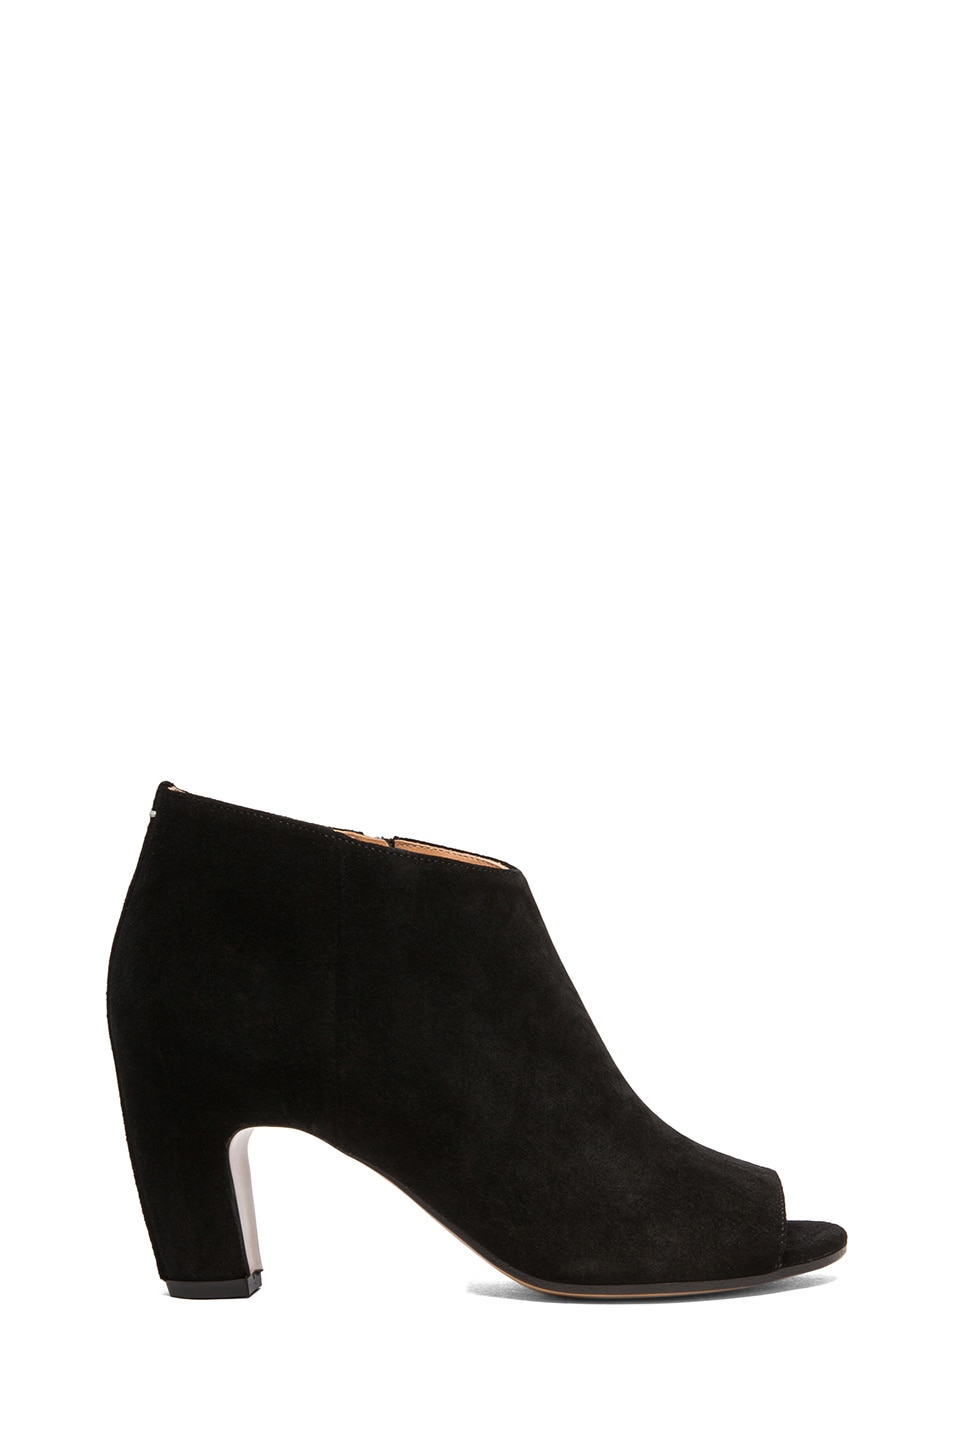 Image 1 of Maison Margiela Open Toe Suede Bootie with Curved Heel in Black